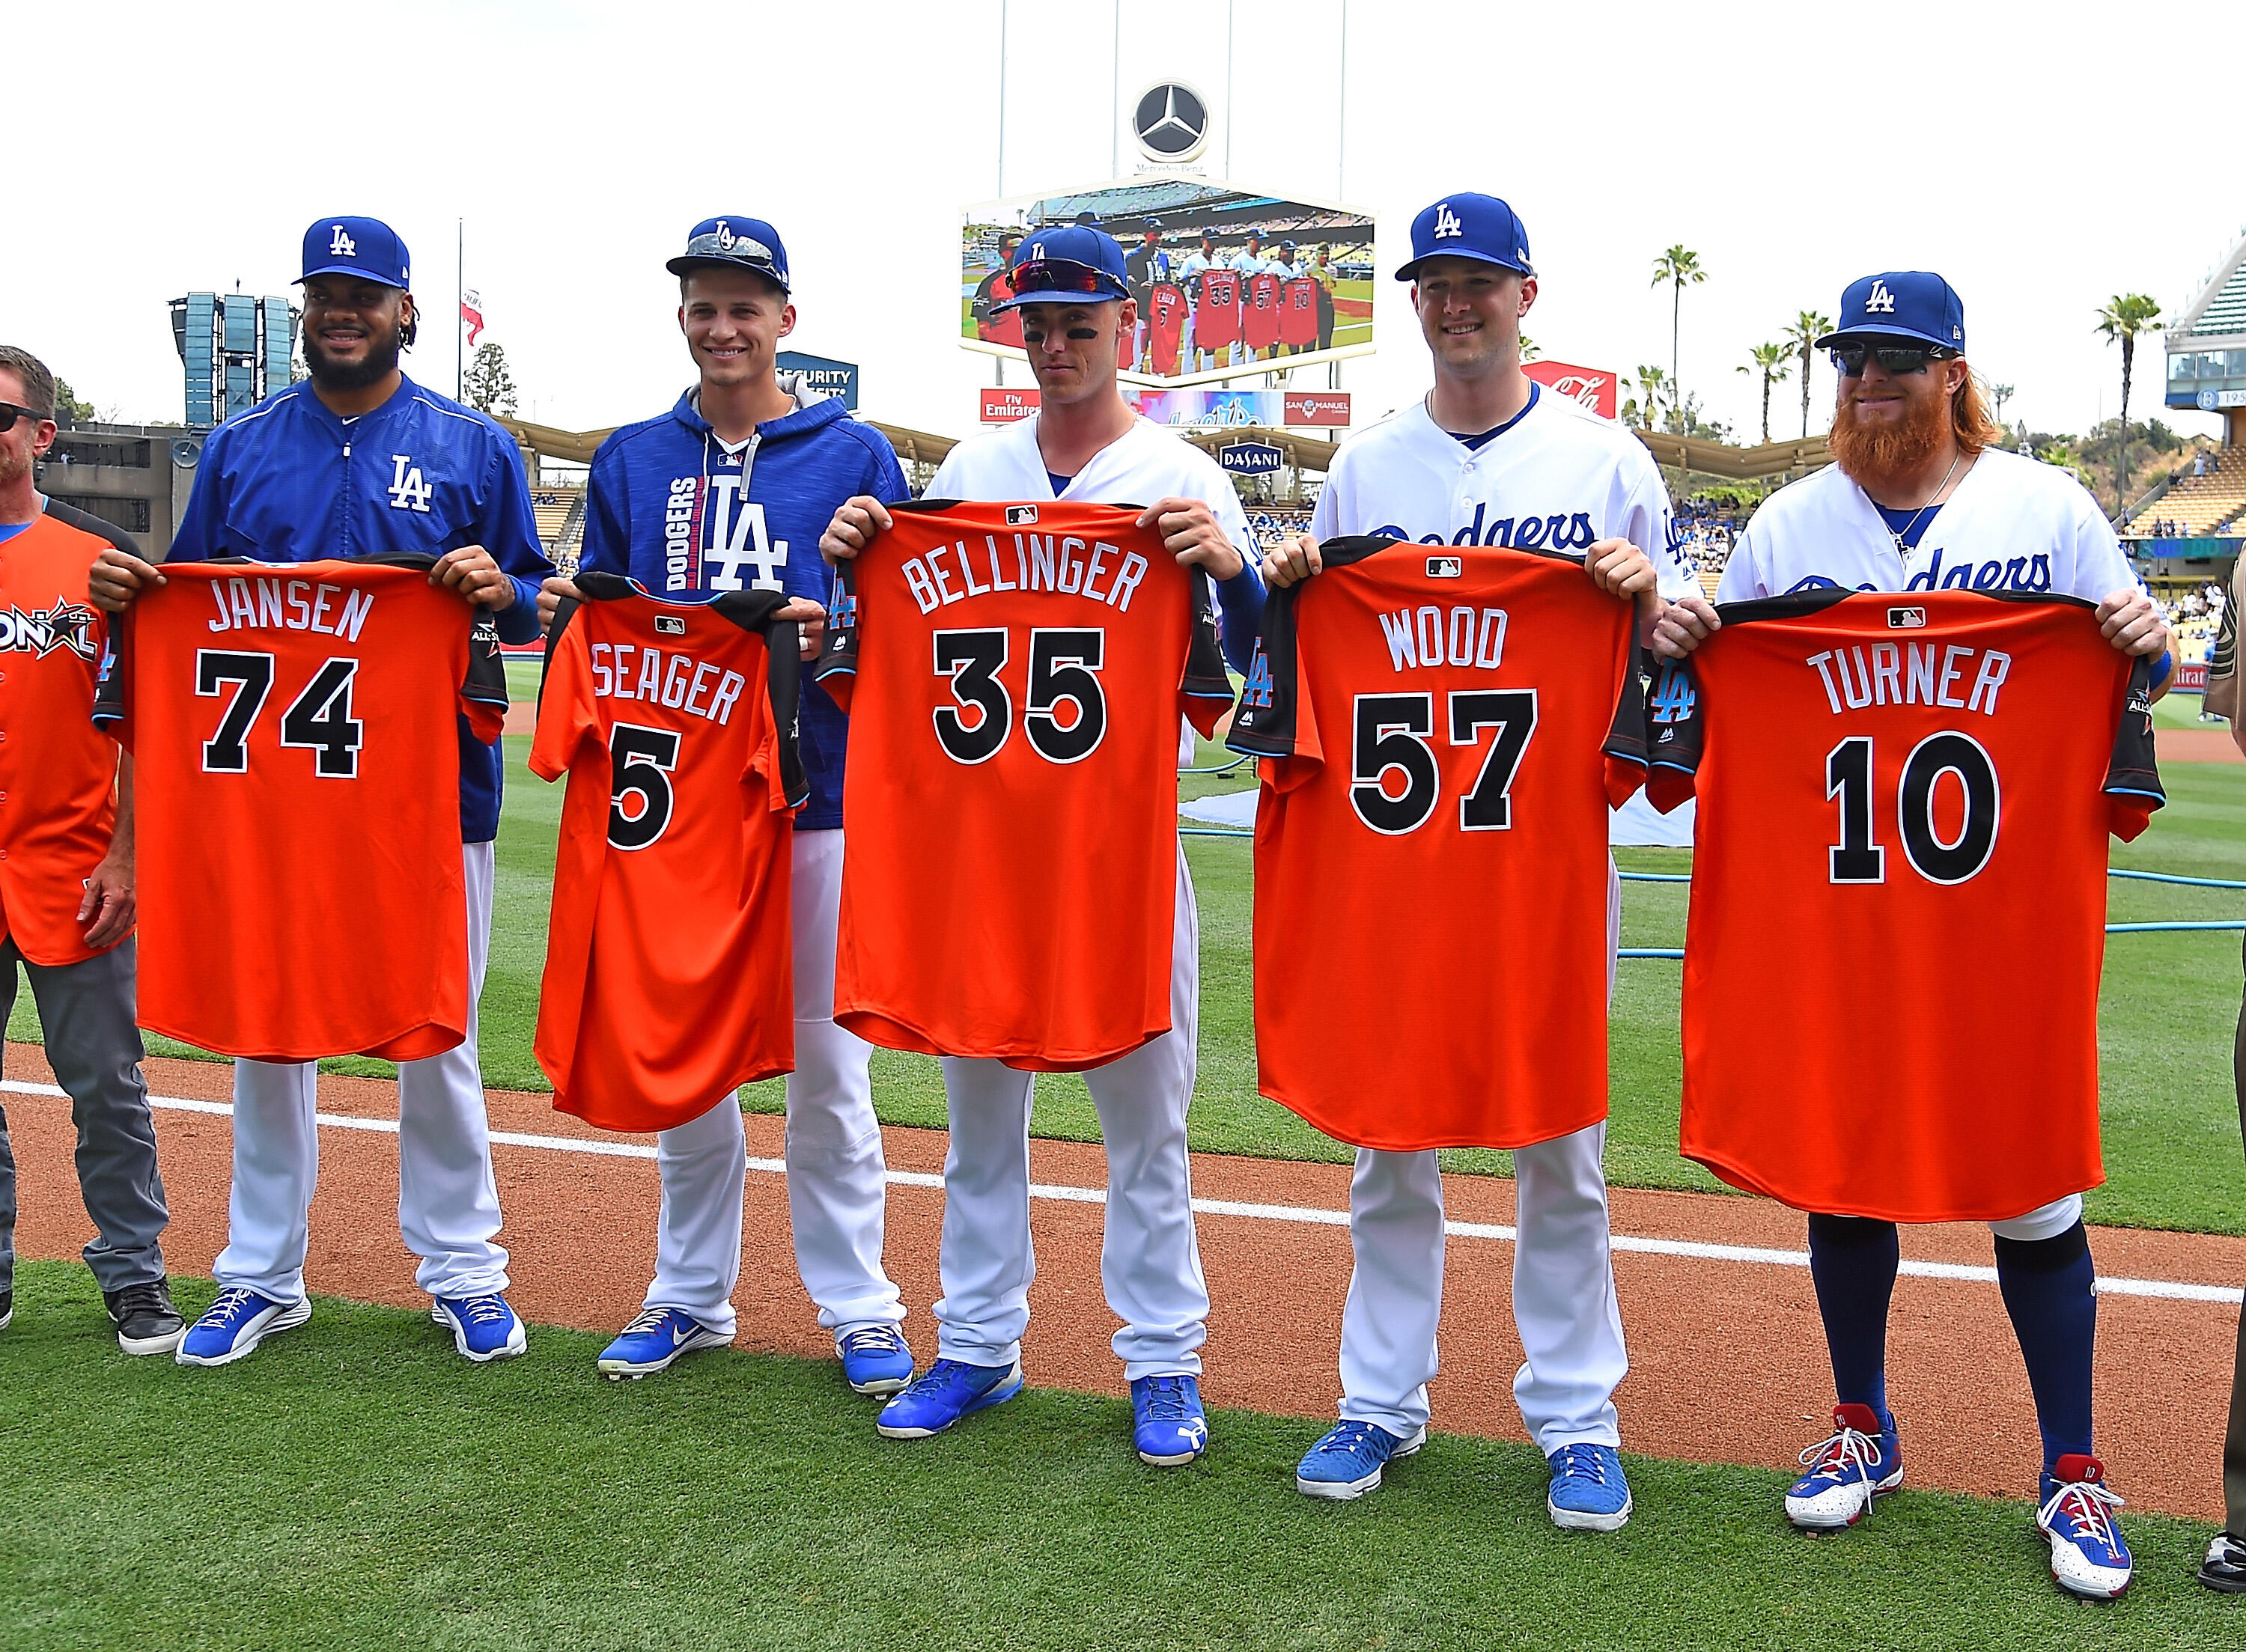 LOS ANGELES, CA - JULY 09:  Los Angeles Dodgers players who will be attending the MLB All-Star game hold their jerseys before the game against the Kansas City Royals at Dodger Stadium on July 9, 2017 in Los Angeles, California.  L-R: Kenley Jansen #74, Co